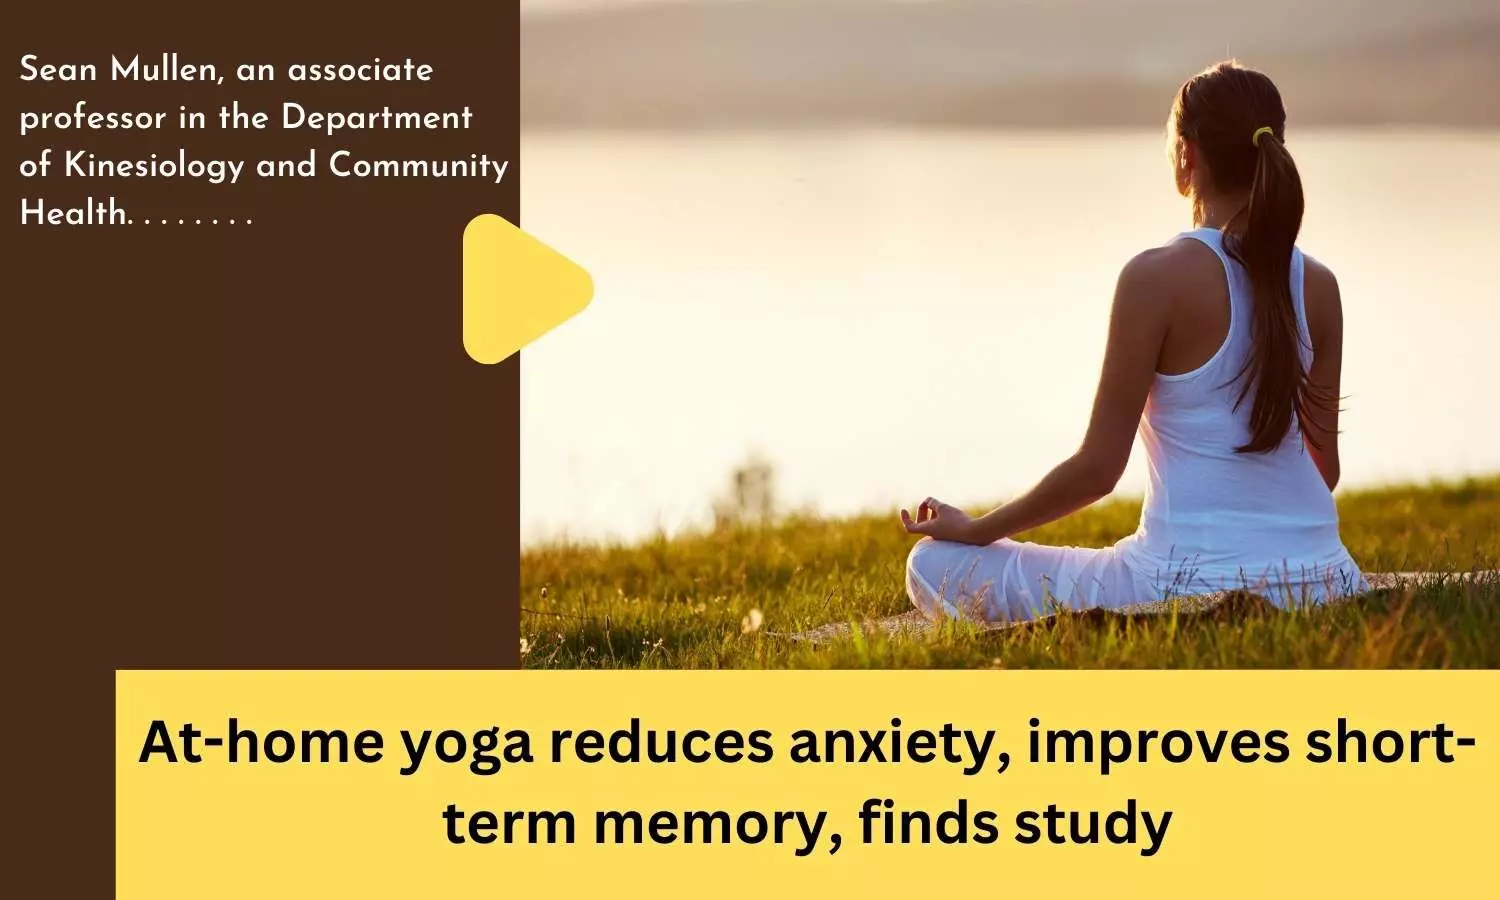 At-home yoga reduces anxiety, improves short-term memory, finds study